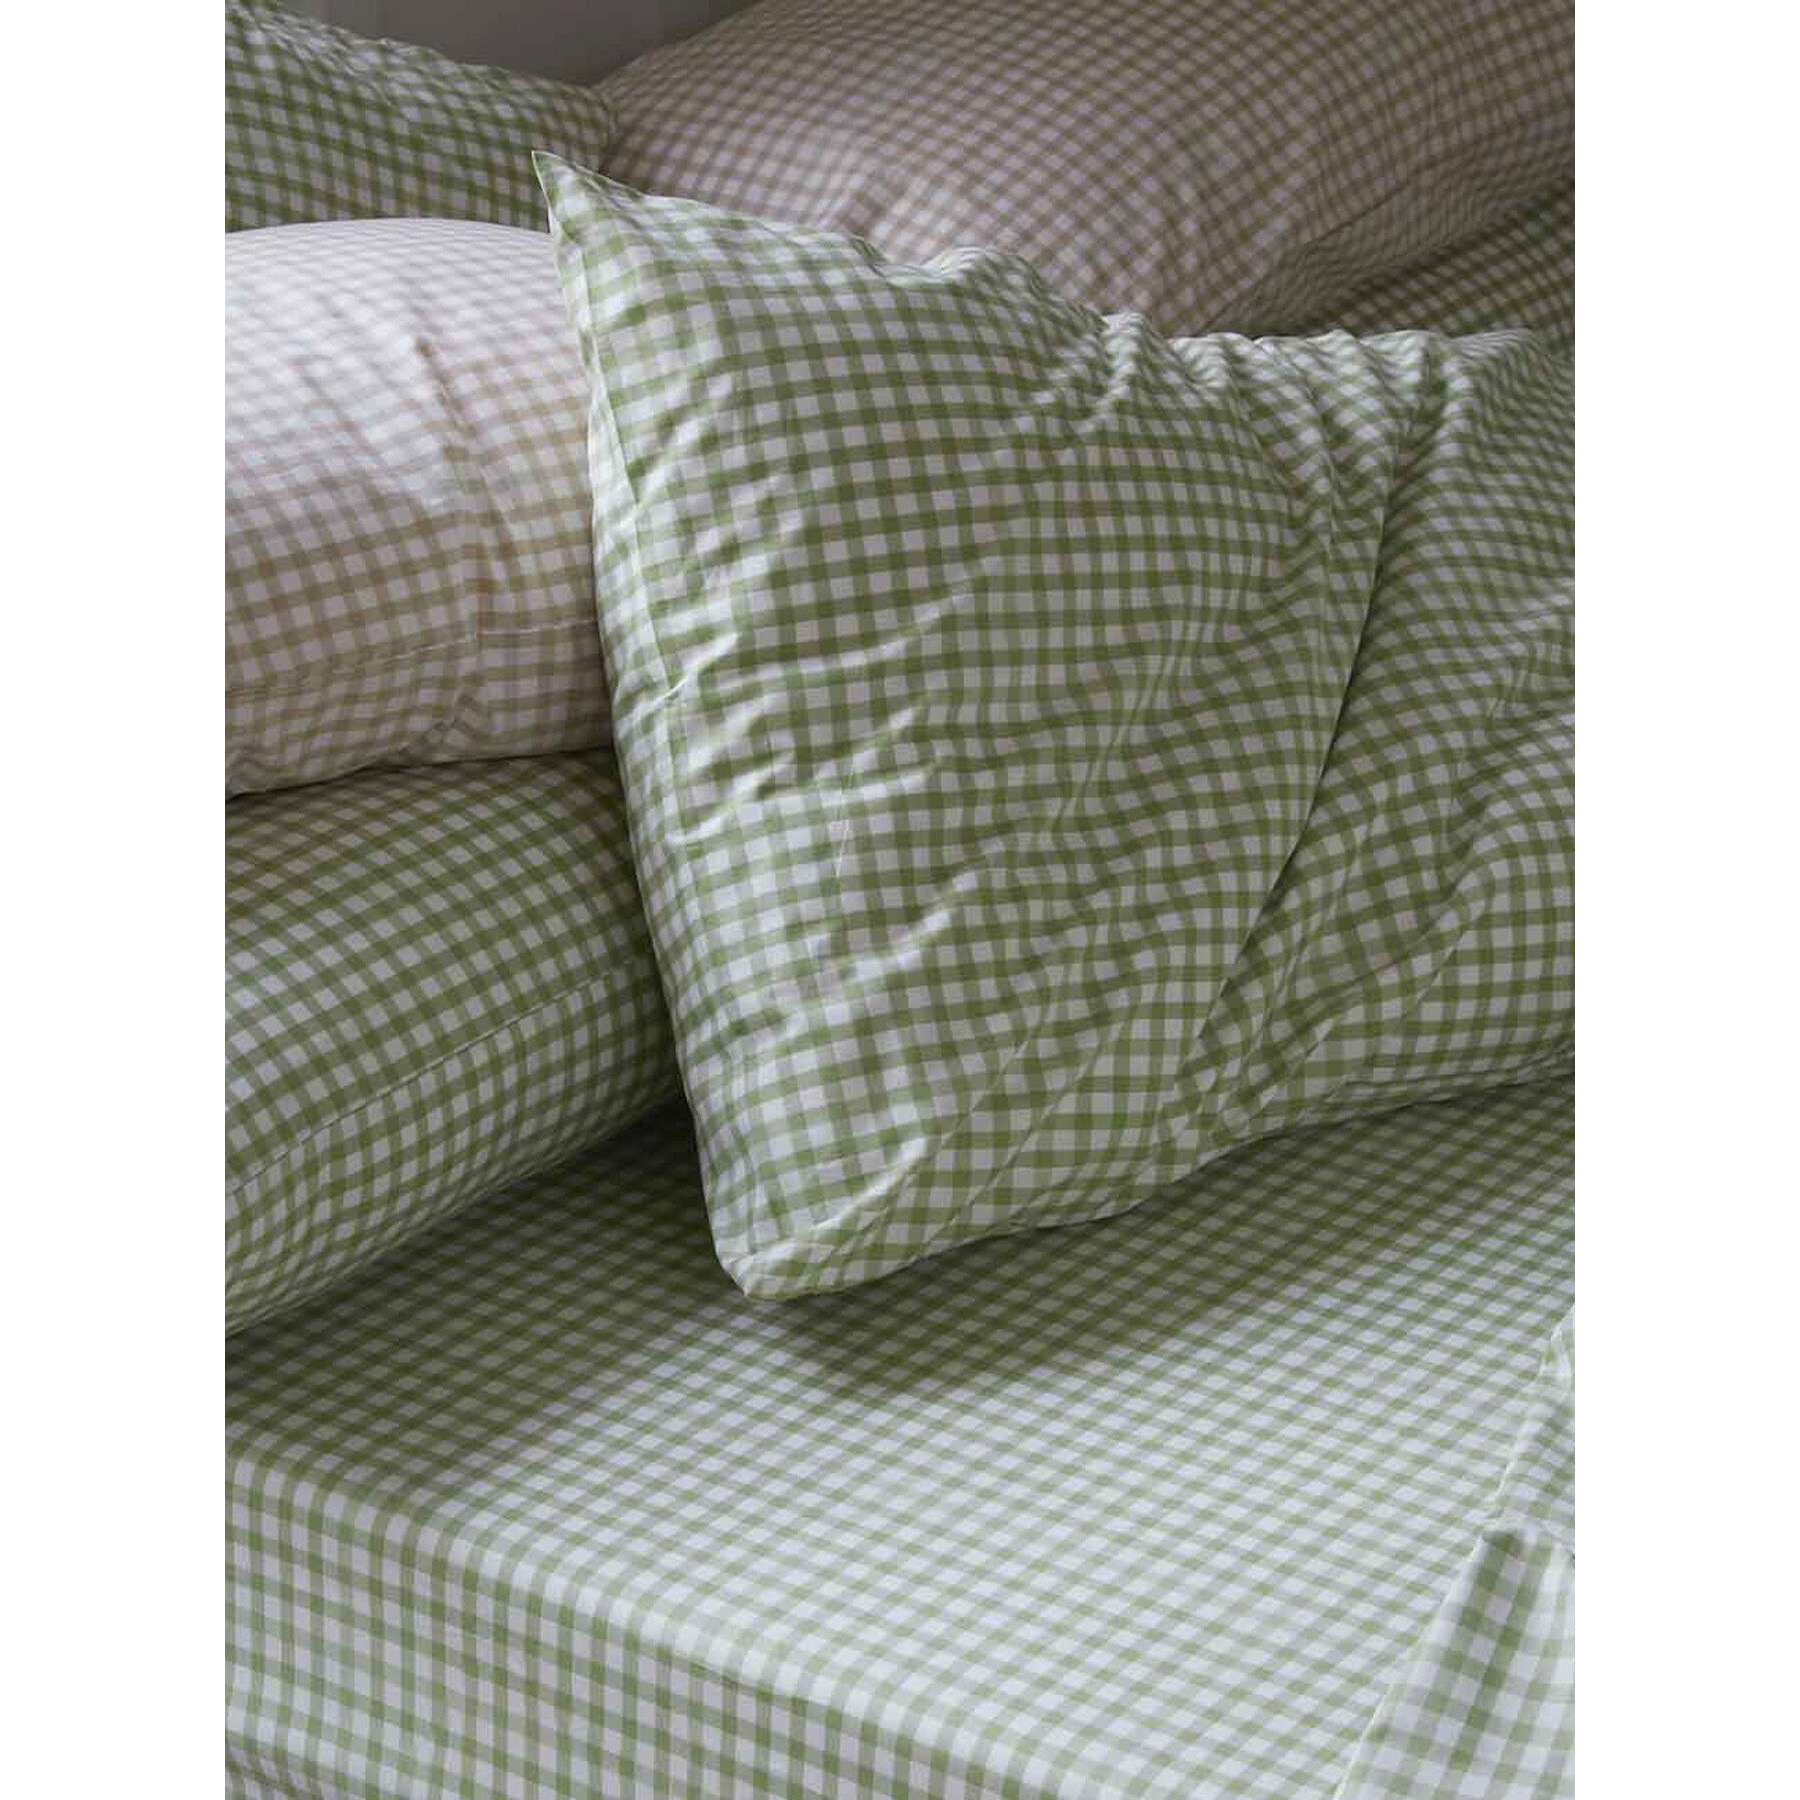 Piglet in Bed Gingham Cotton Pillowcases (pair) - Size Square Green - image 1